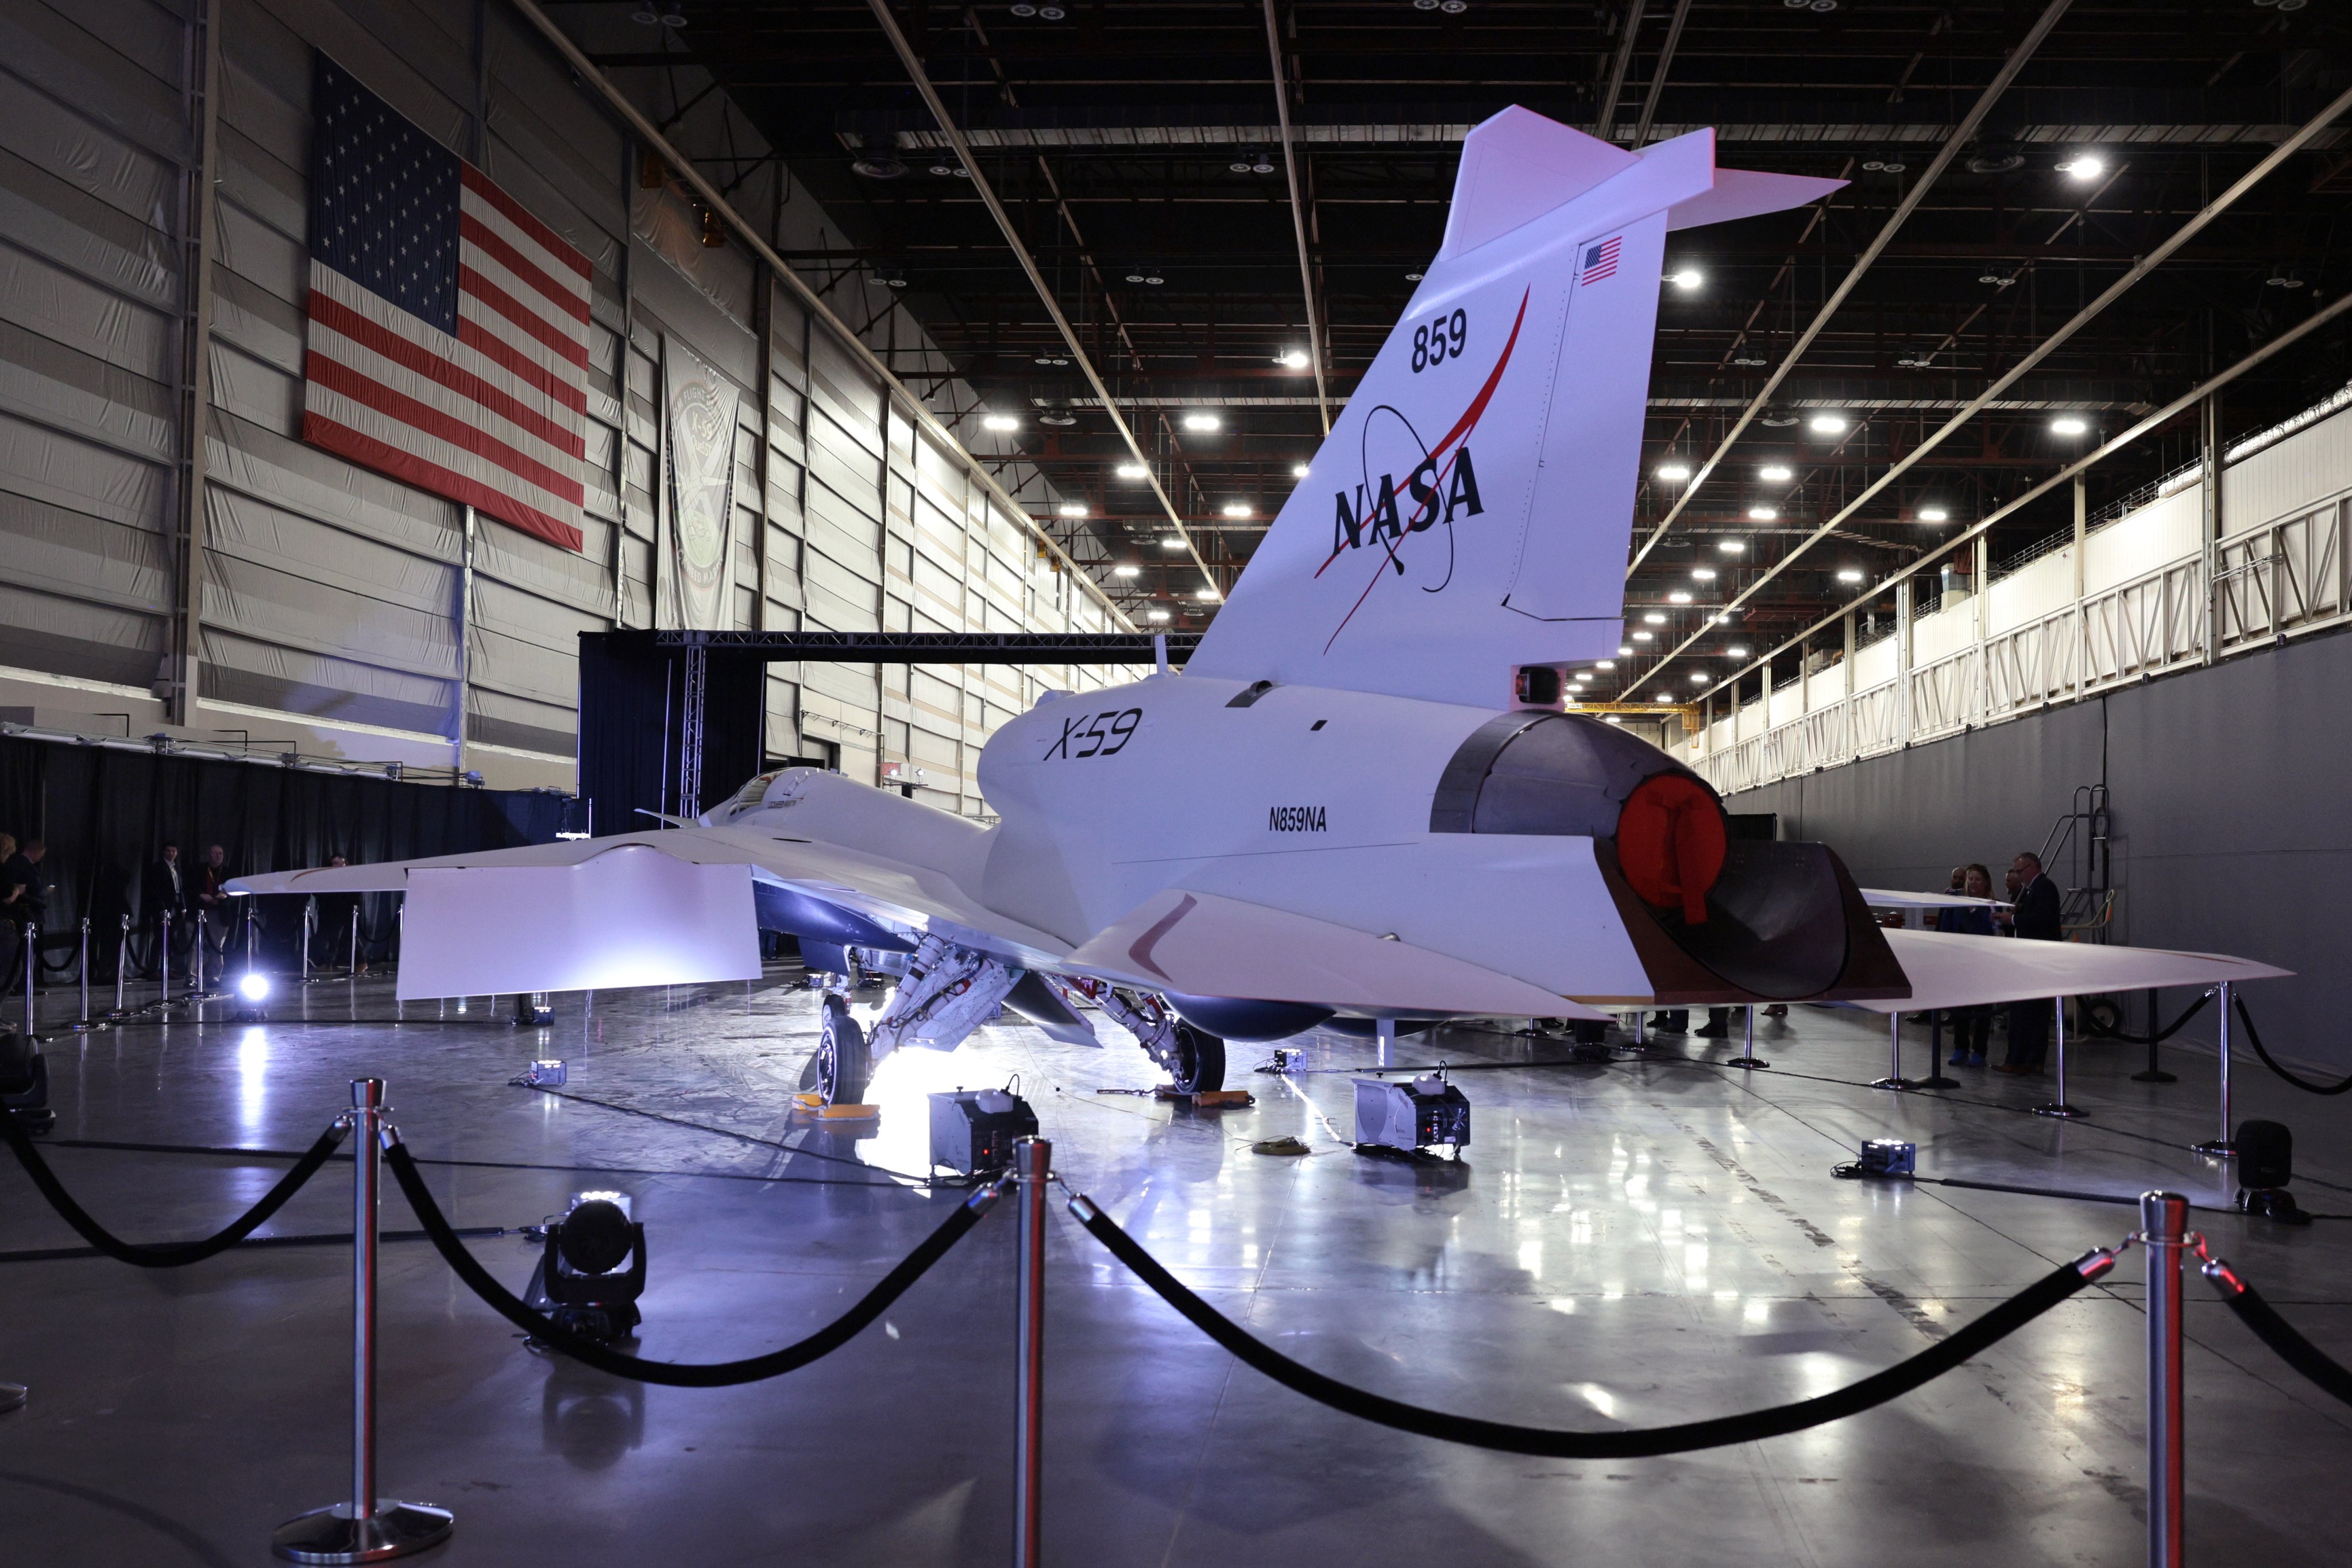 Nasa unveils X-59 supersonic aircraft that can fly faster than the